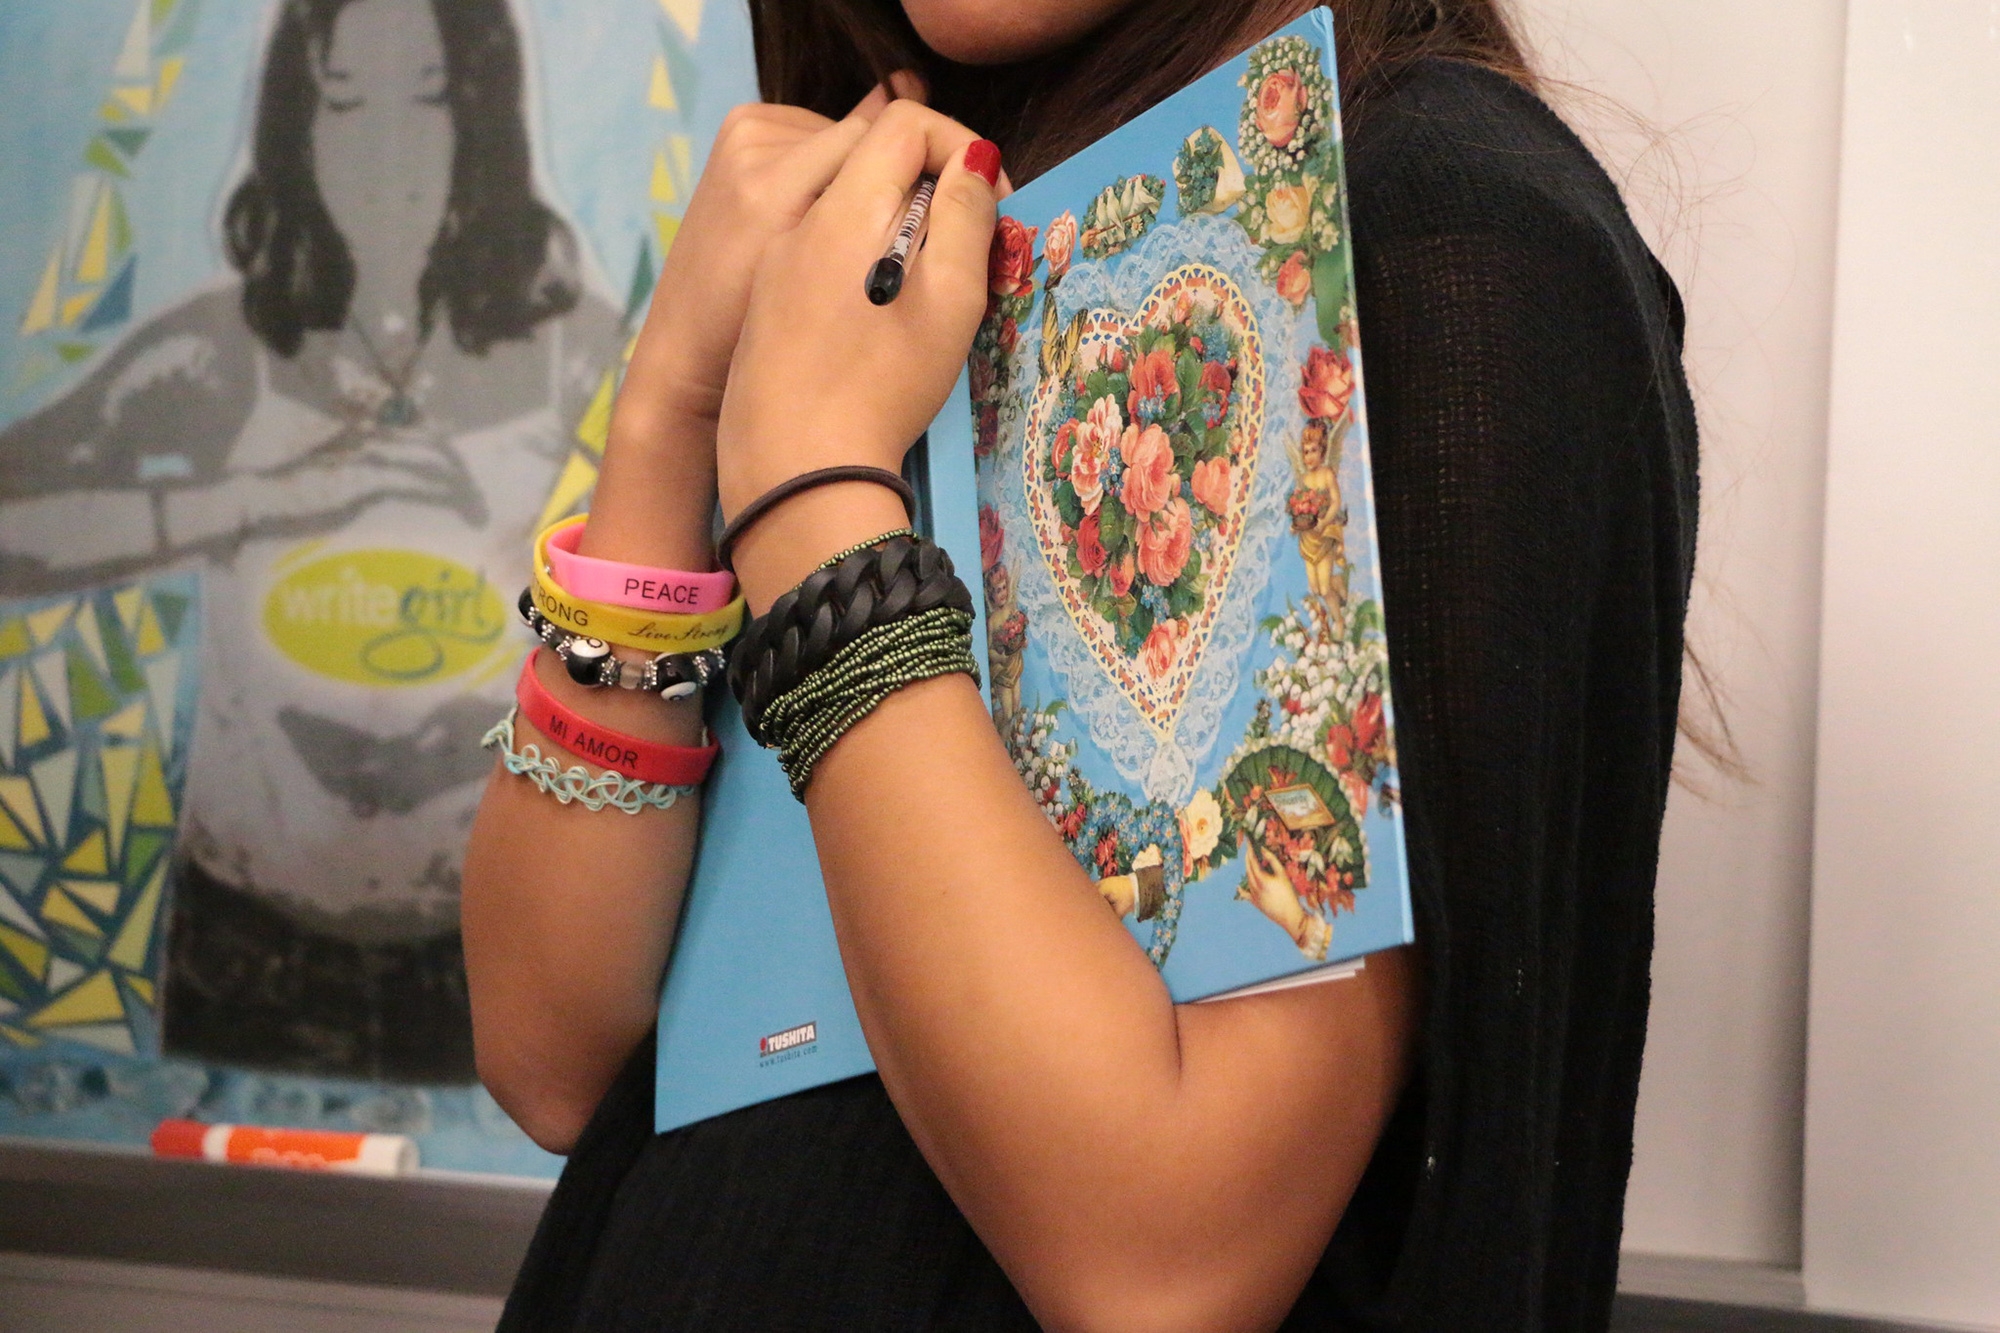 An image of arms holding an open book. The person is wearing a variety of bracelets showing their personality. 